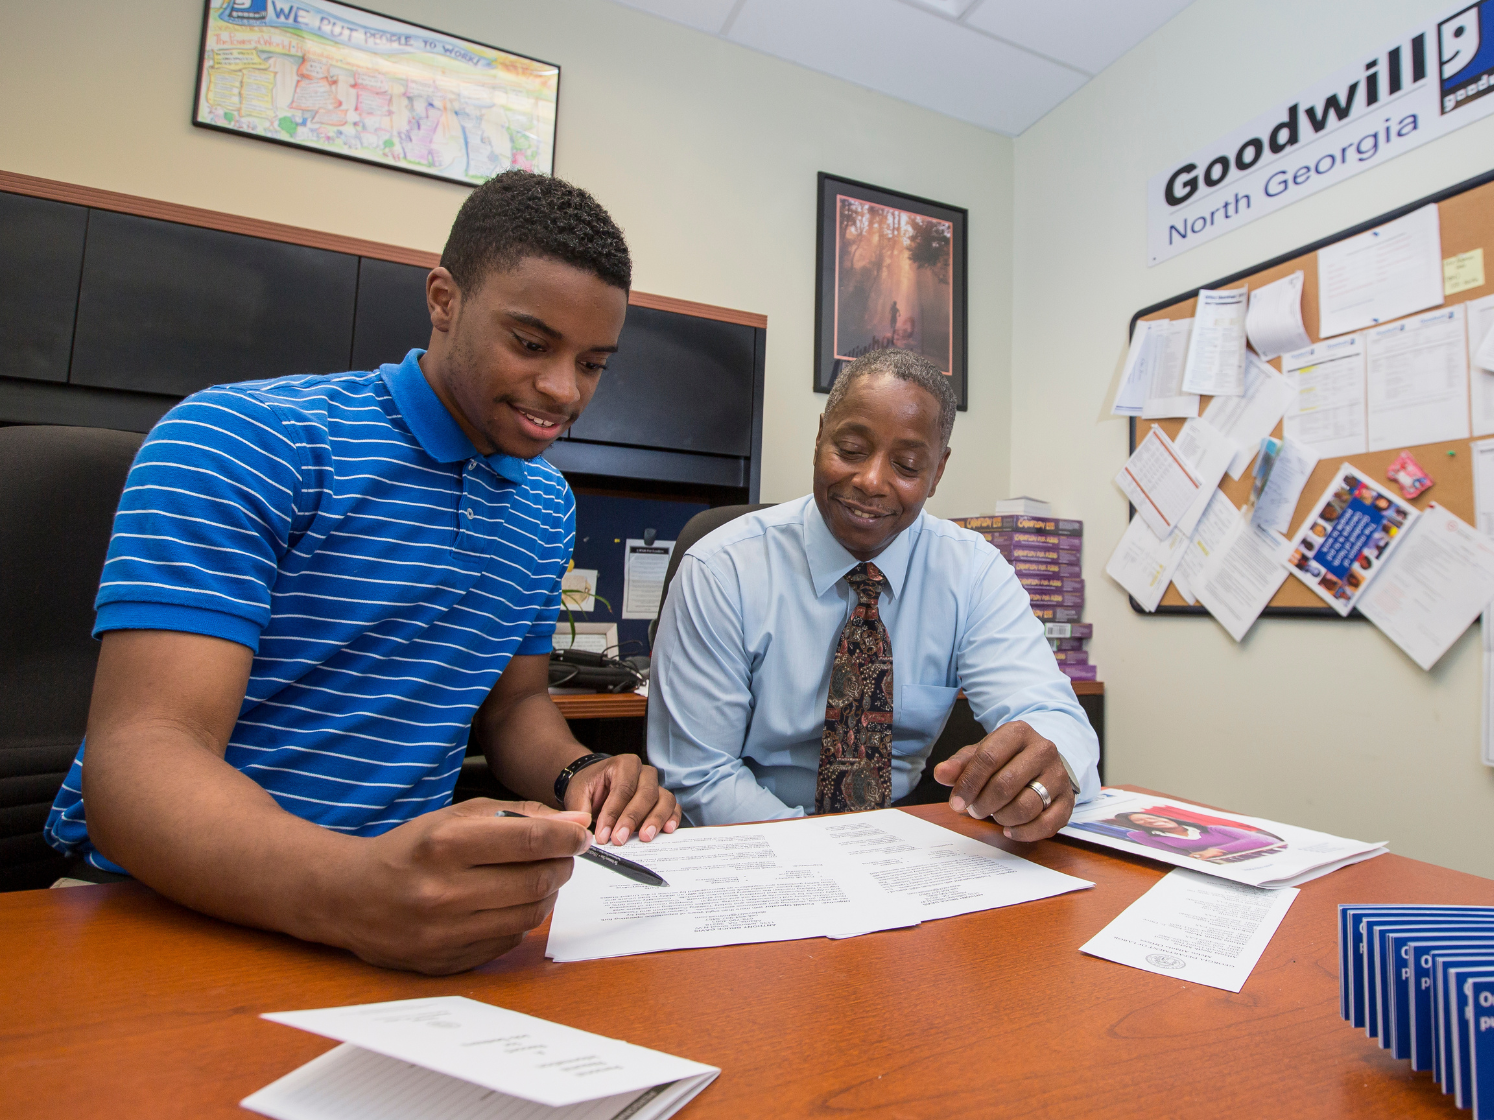 Image of job seeker and career center employee sitting at a desk and reviewing papers